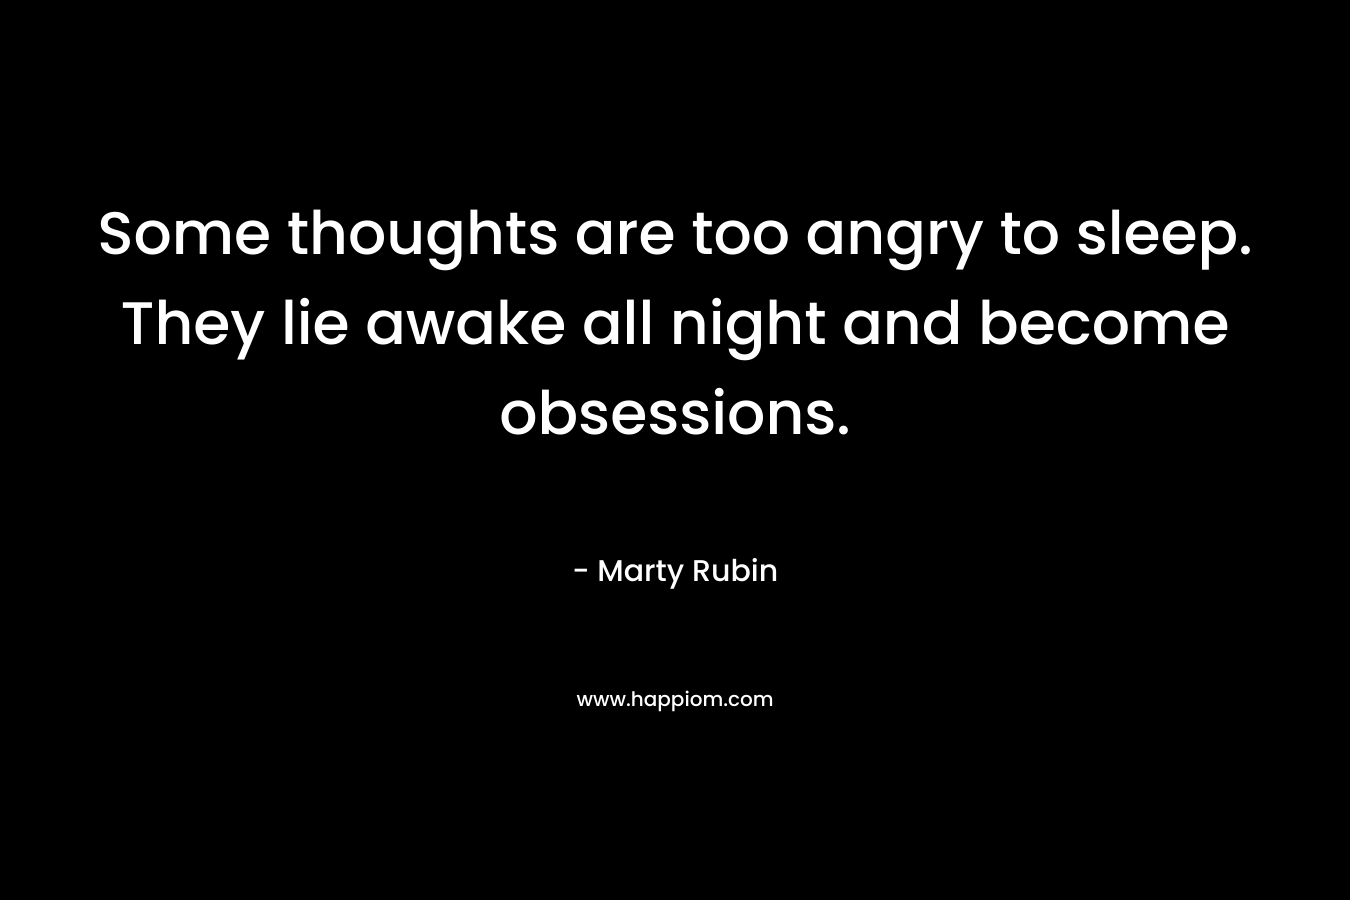 Some thoughts are too angry to sleep. They lie awake all night and become obsessions.